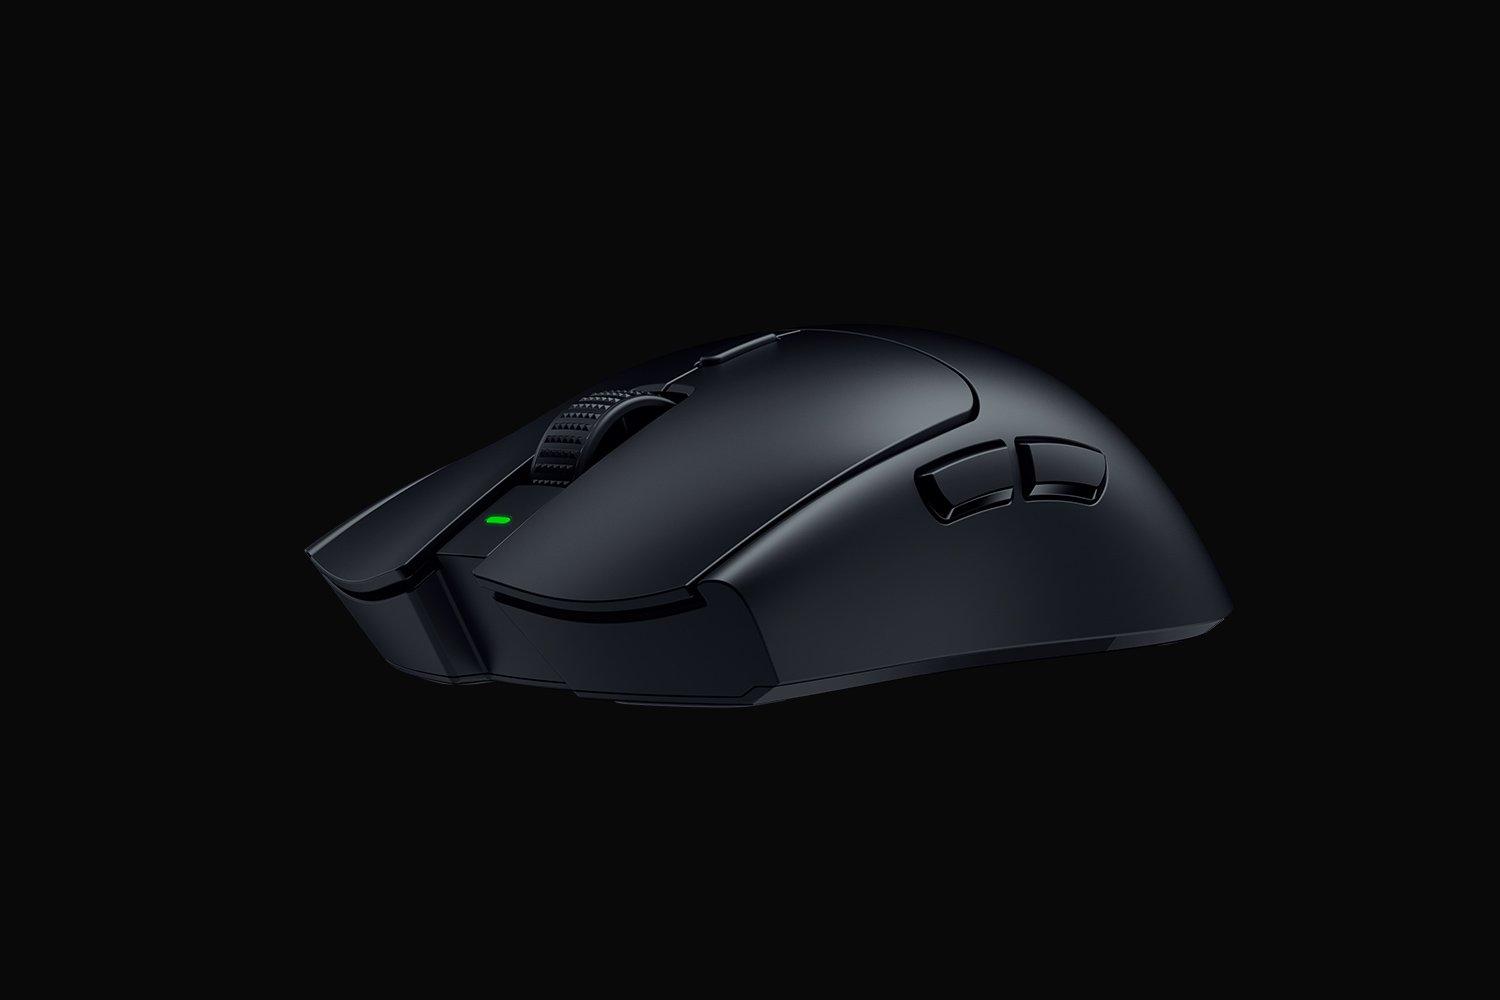 VIPER V3 HYPERSPEED WIRELESS MOUSE